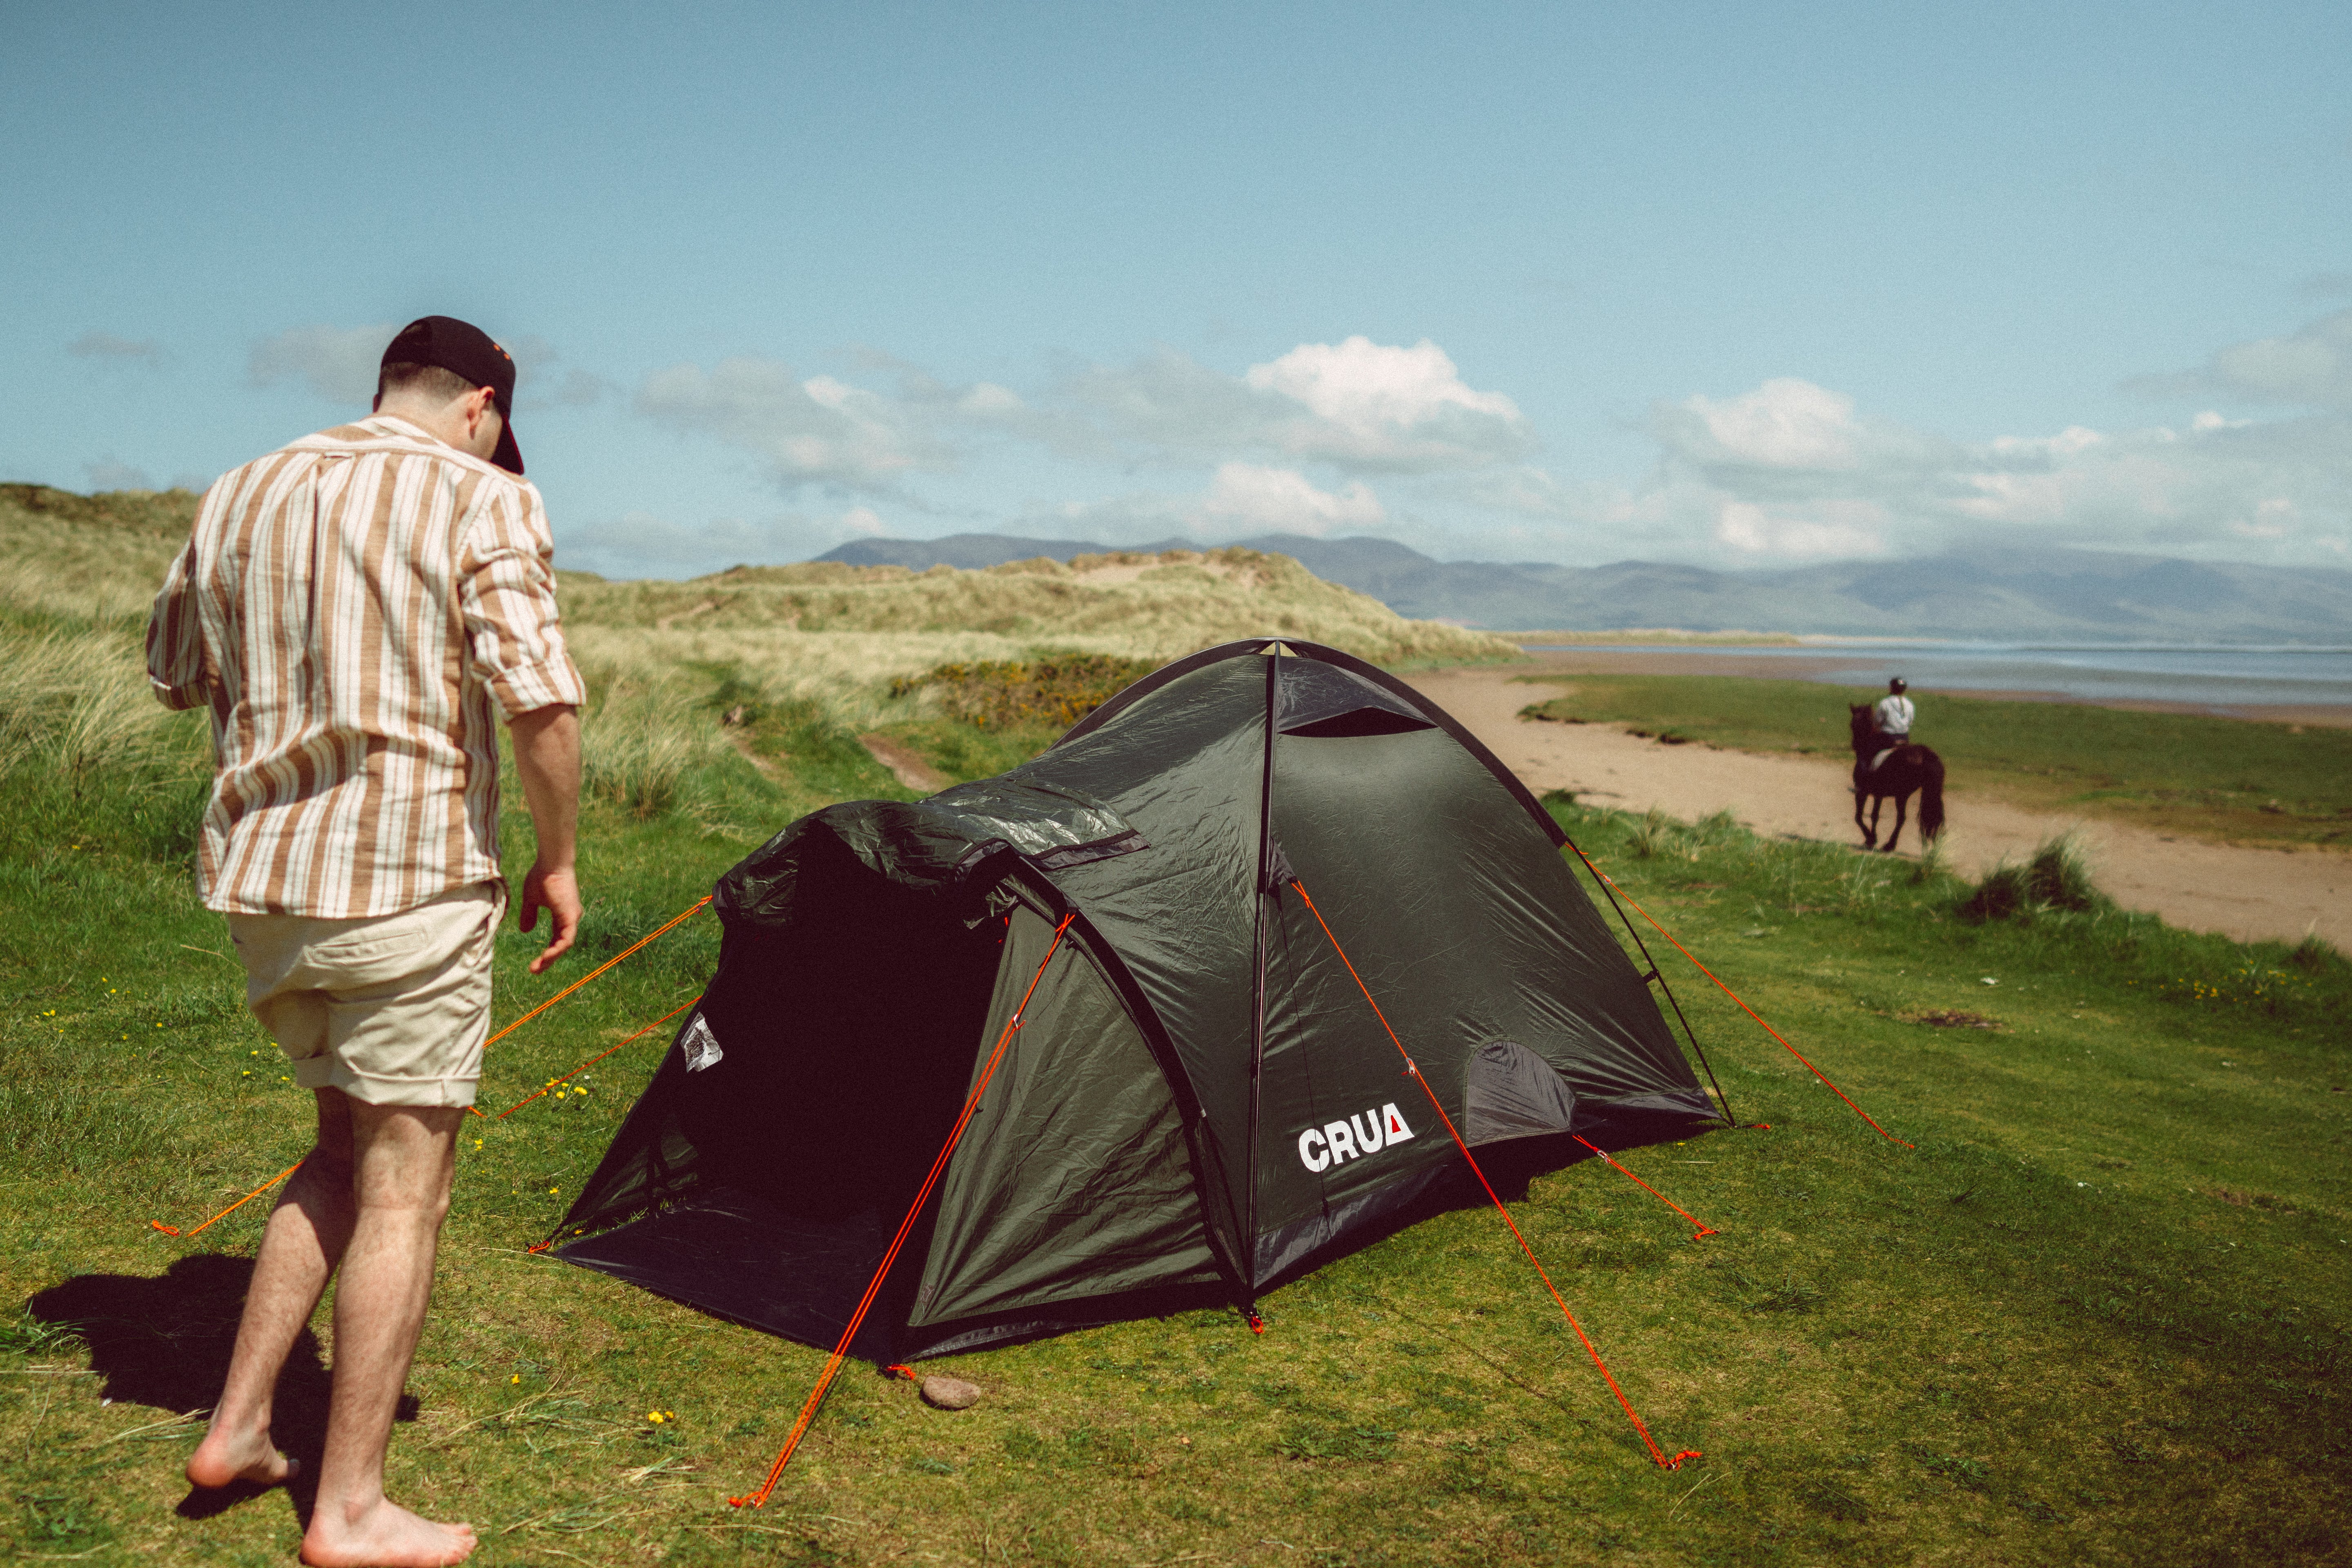 DUO| 2 PERSON CAMPING, DOME TENT - ALL WEATHER COMPATIBLE, WATERPROOF, SPACIOUS SHELTER WITH ENHANCED COMFORT AND DURABILITY